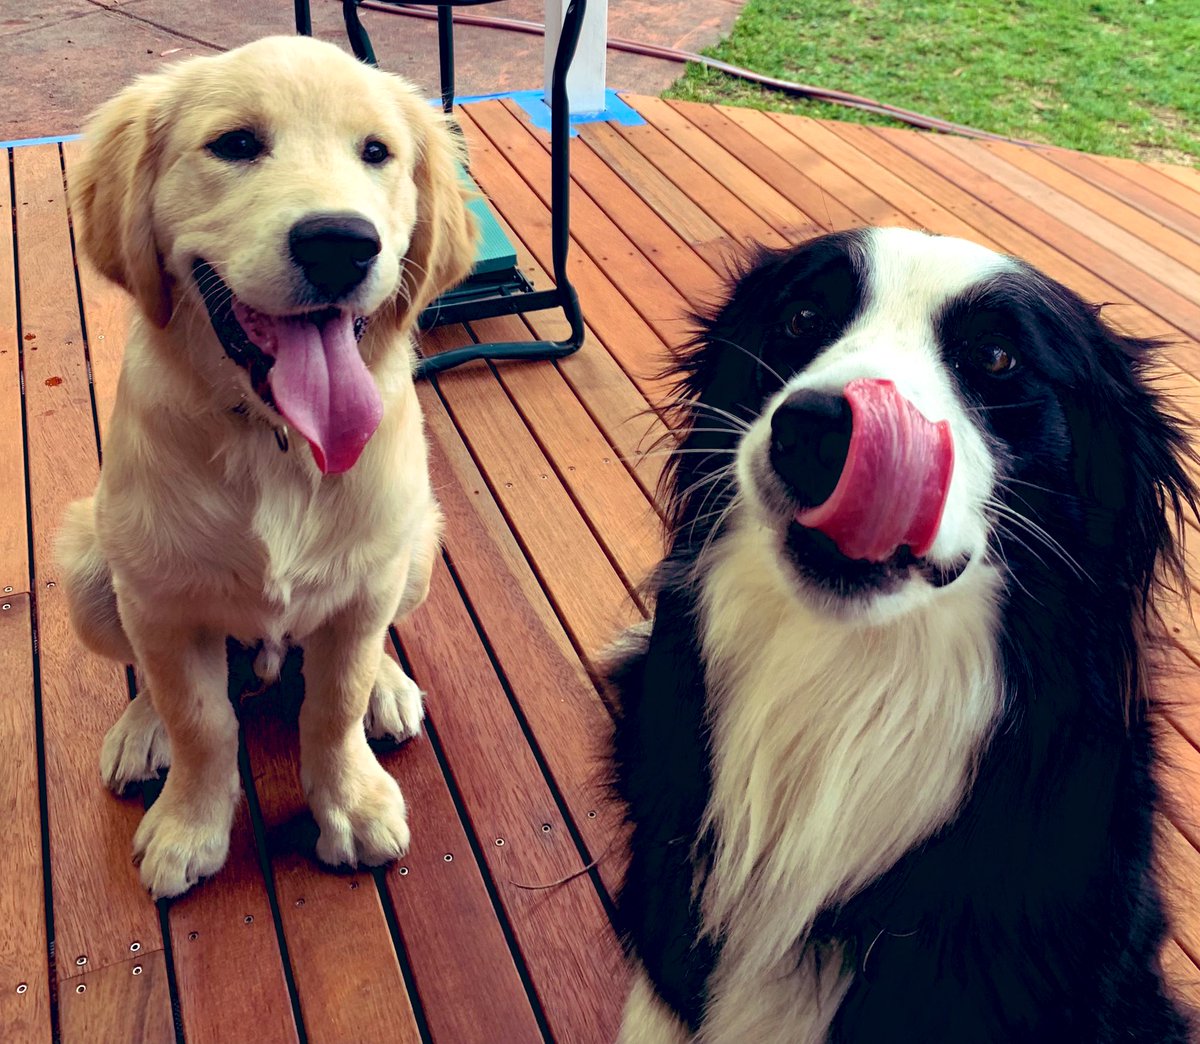 Now she is just showing off!!! #tonguesout #tonguesouttuesday #playmates #DogsofTwittter #GoldenRetrievers #Bordercollie